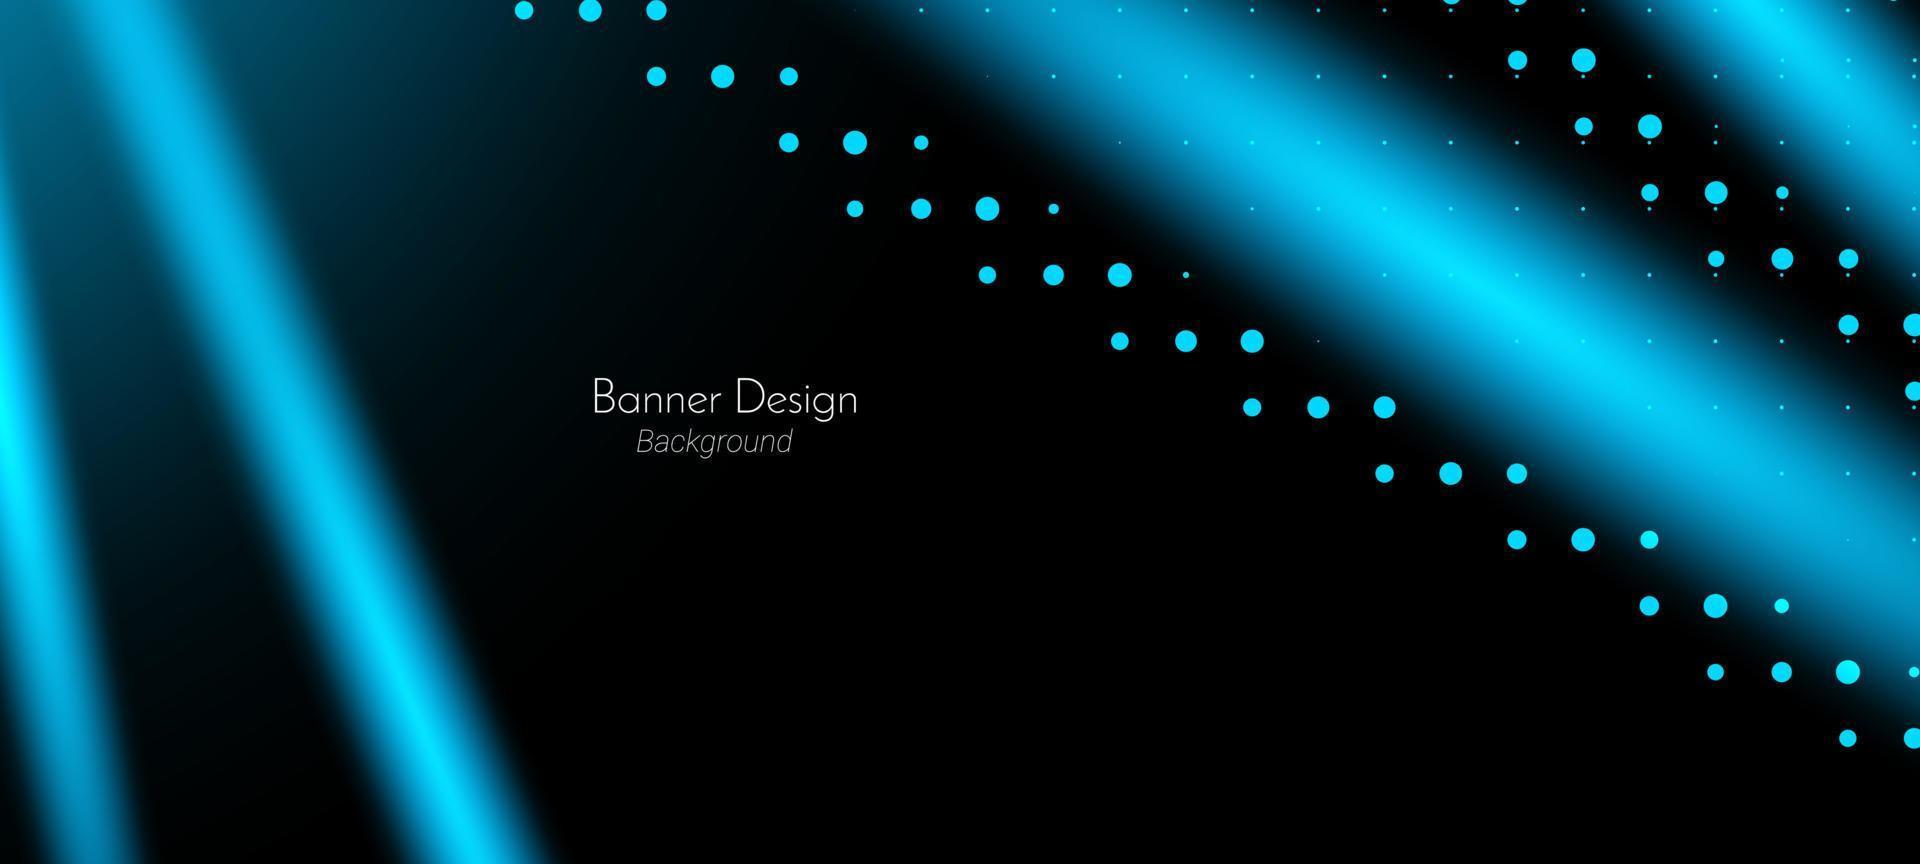 Abstract geometric blue transparent gradient lines illustration pattern background vector